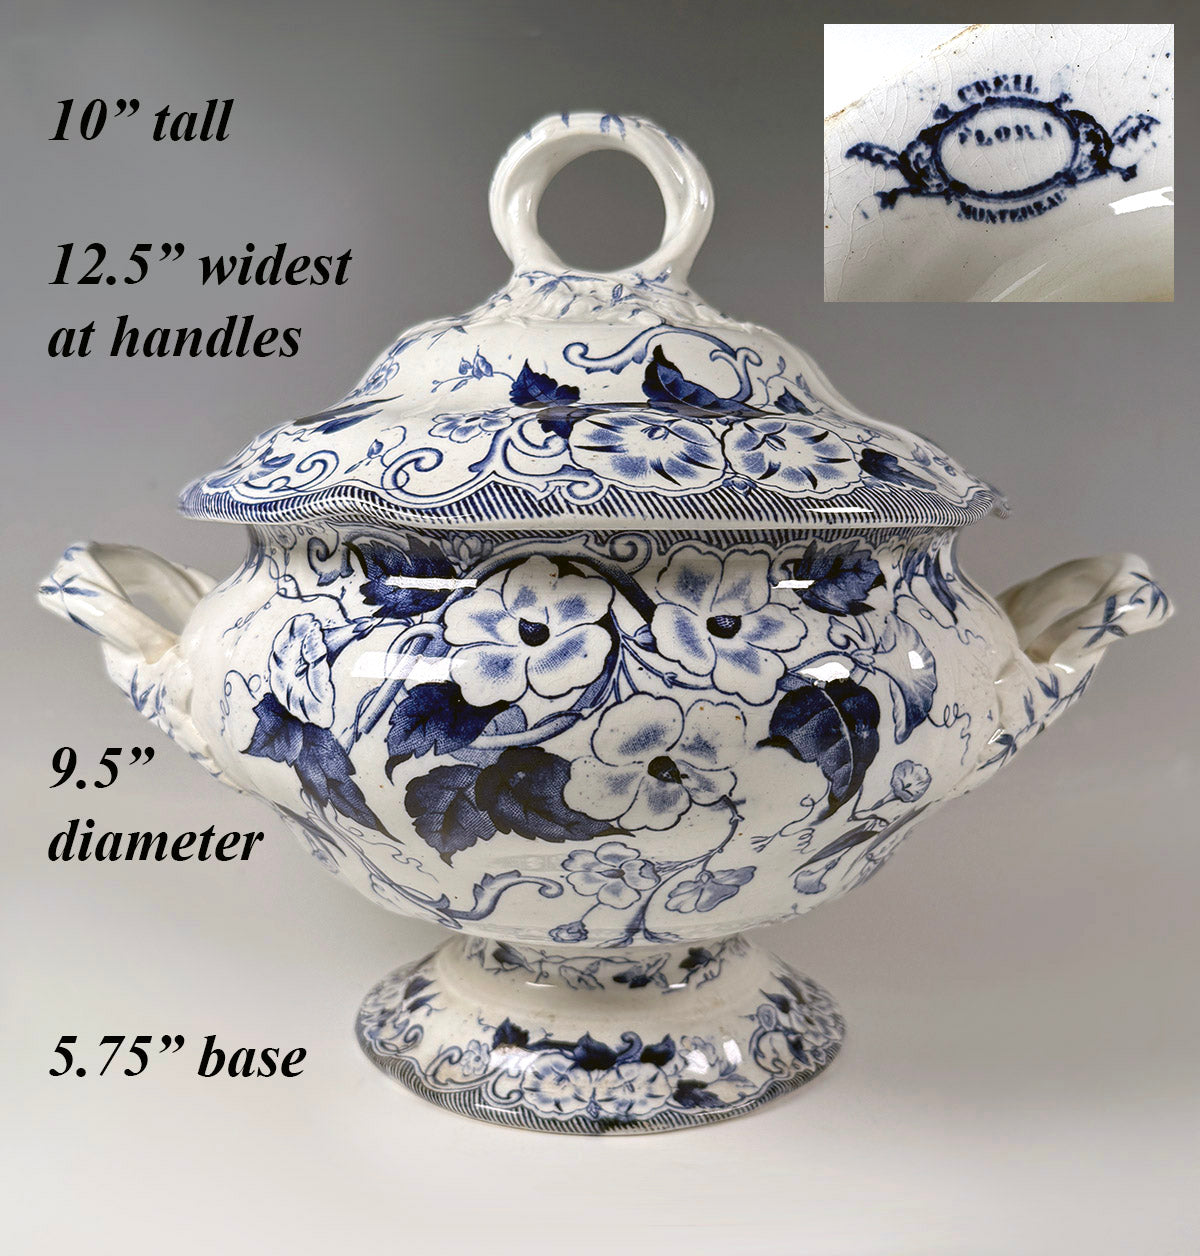 Big Antique French Flow Blue Faïence Pottery Soup Bowl Tureen & Lid, "Flora" Pattern by B & Tie, Creil Montreal